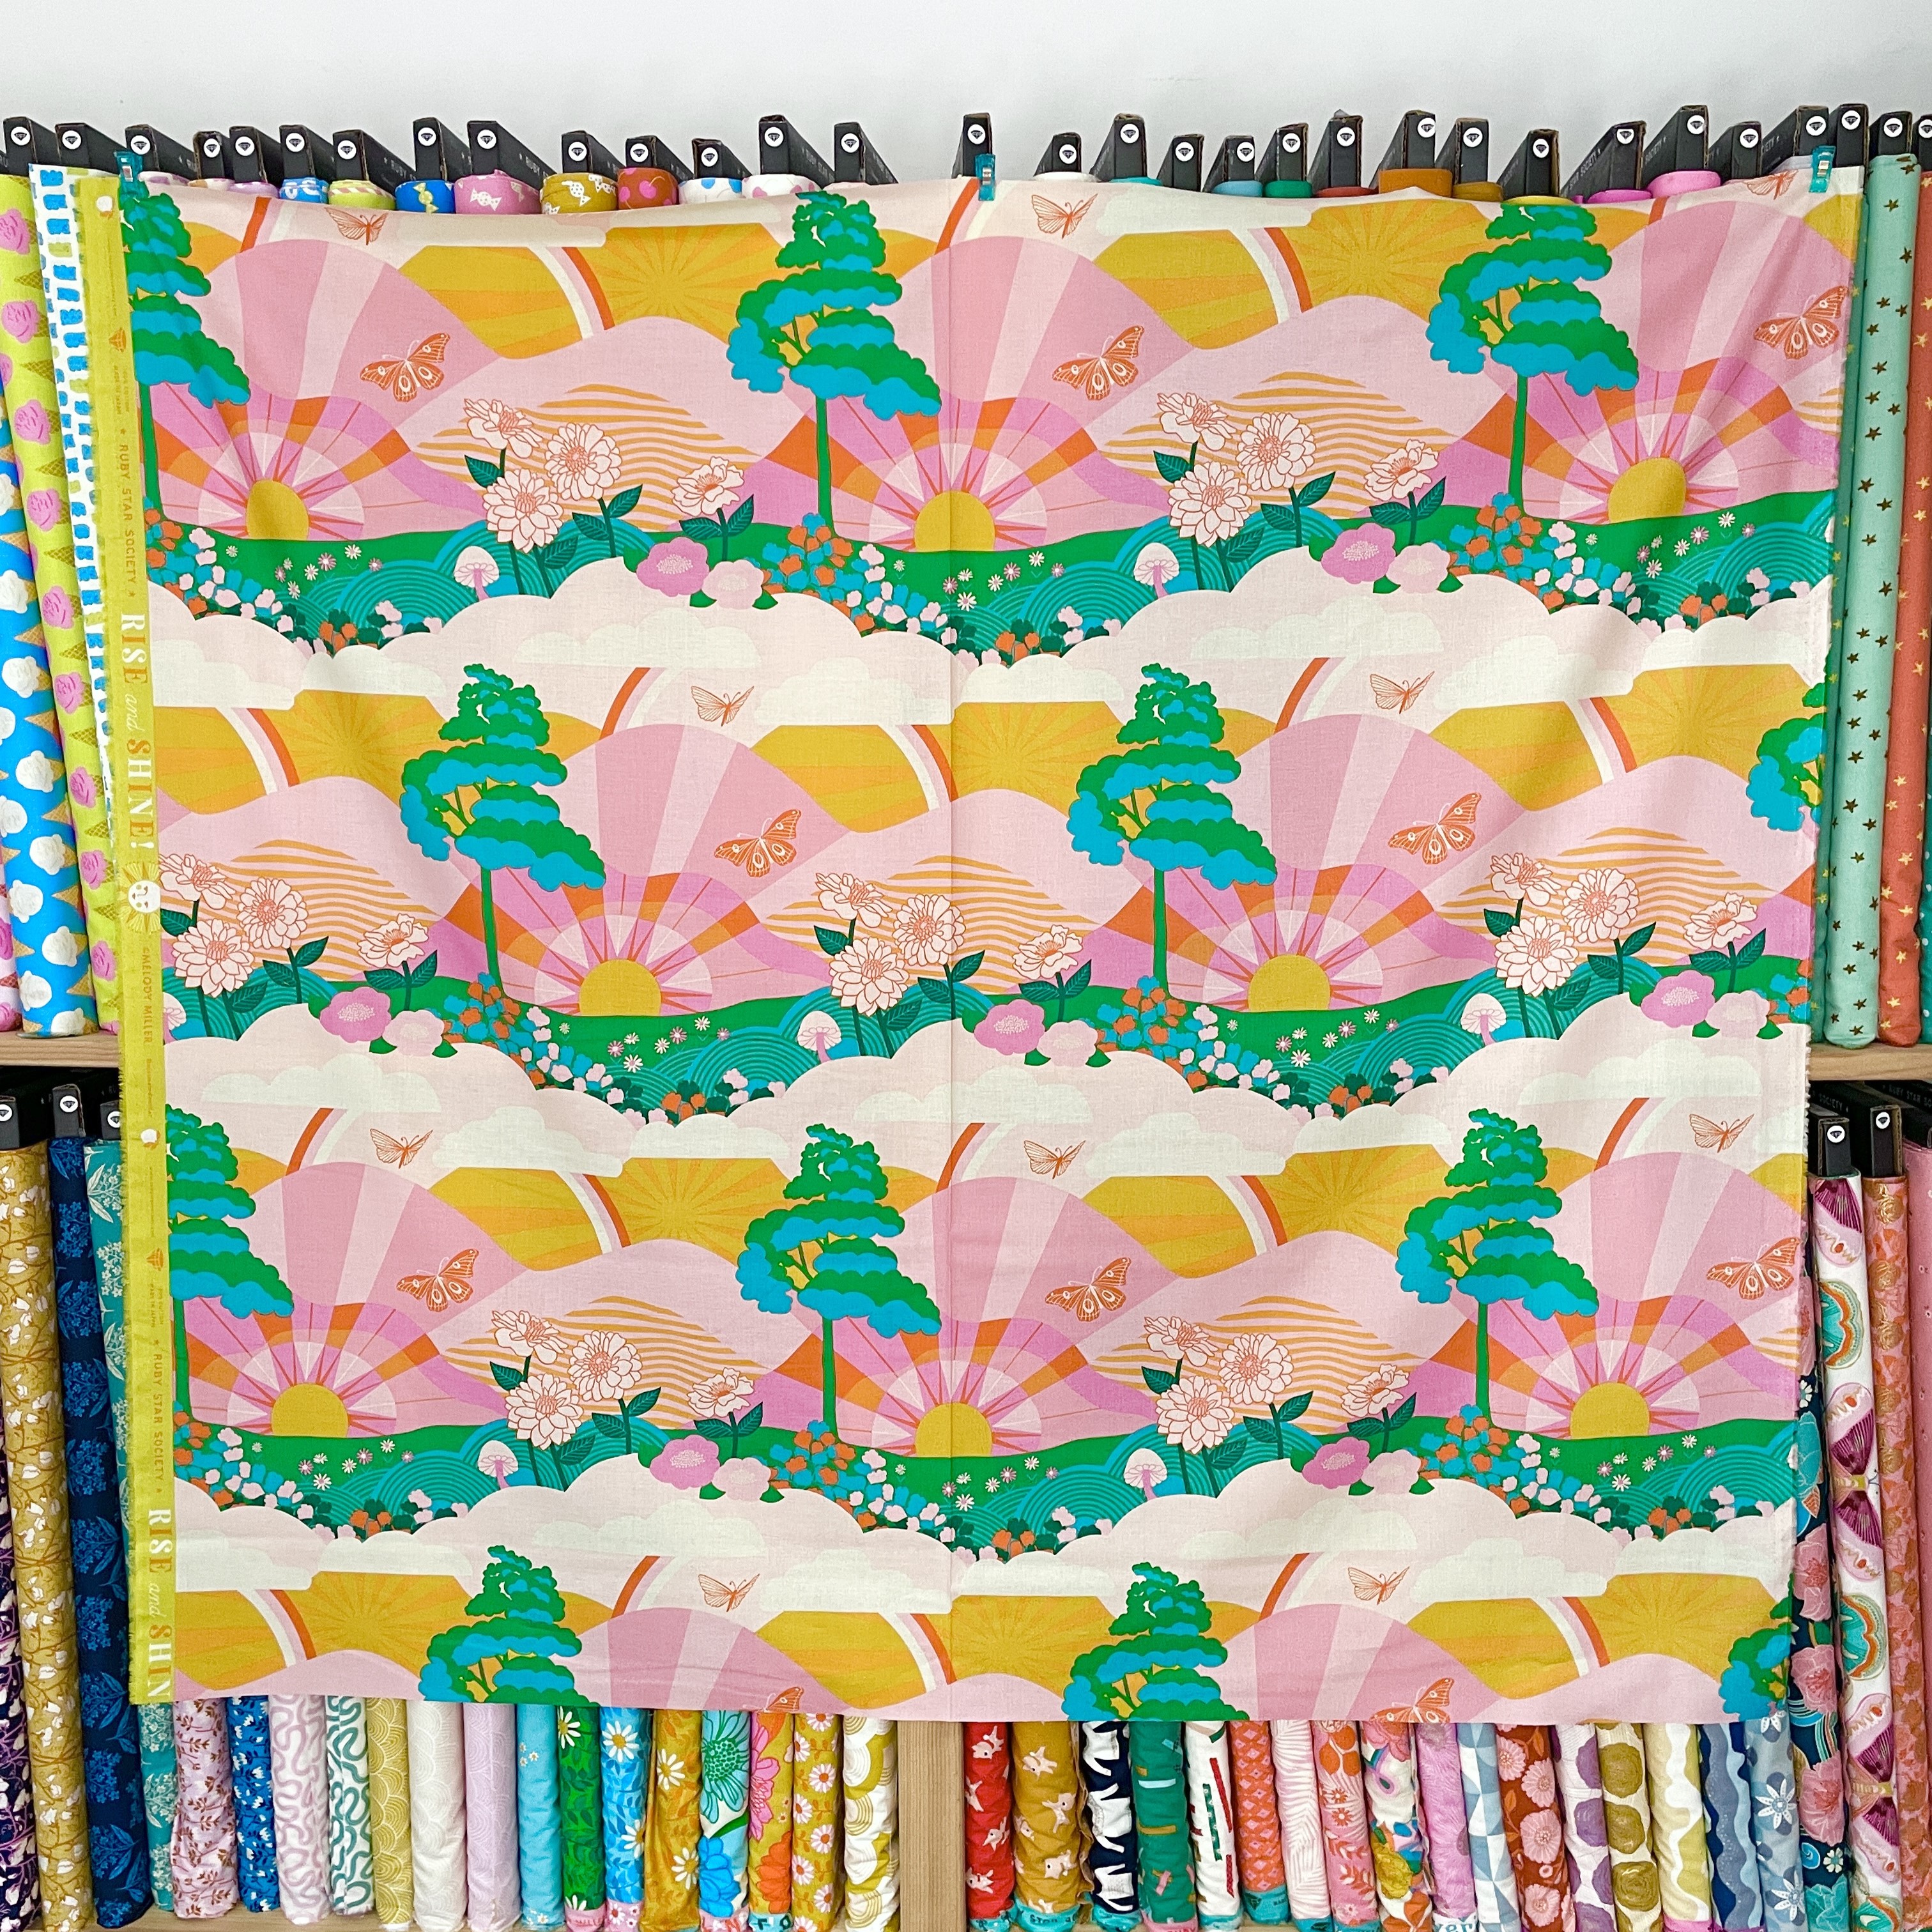 Hello Sunshine June Panel Print from the modern patchwork and quilting fabric collection Rise and Shine designed by Melody Miller for Ruby Star Society